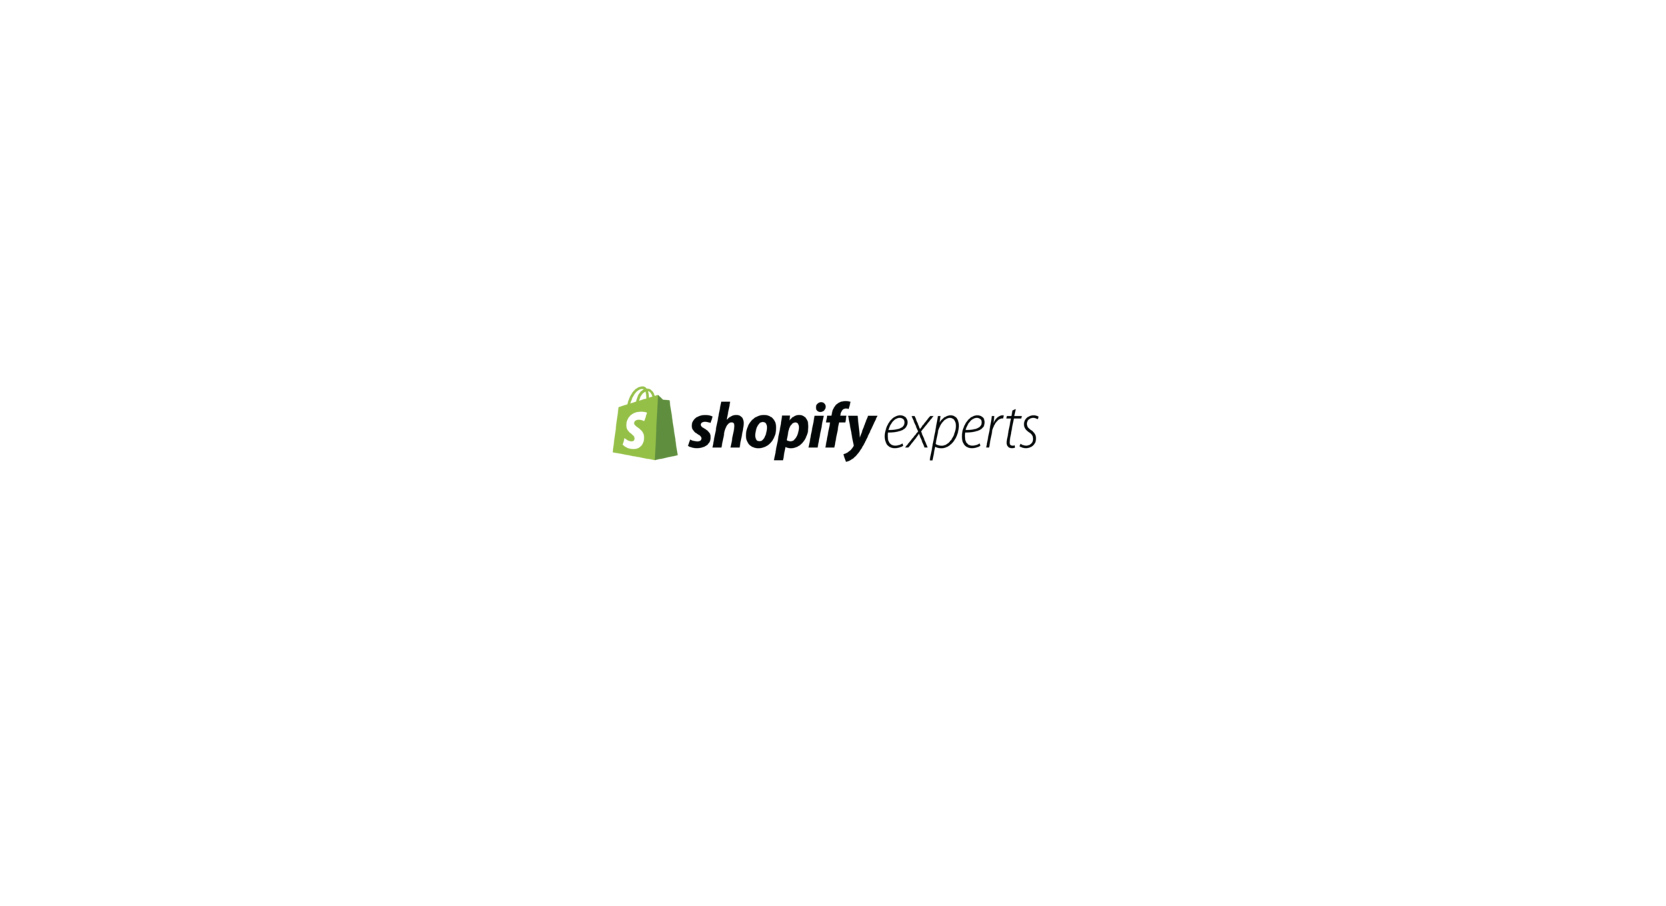 Shopify Expertsの認定取得